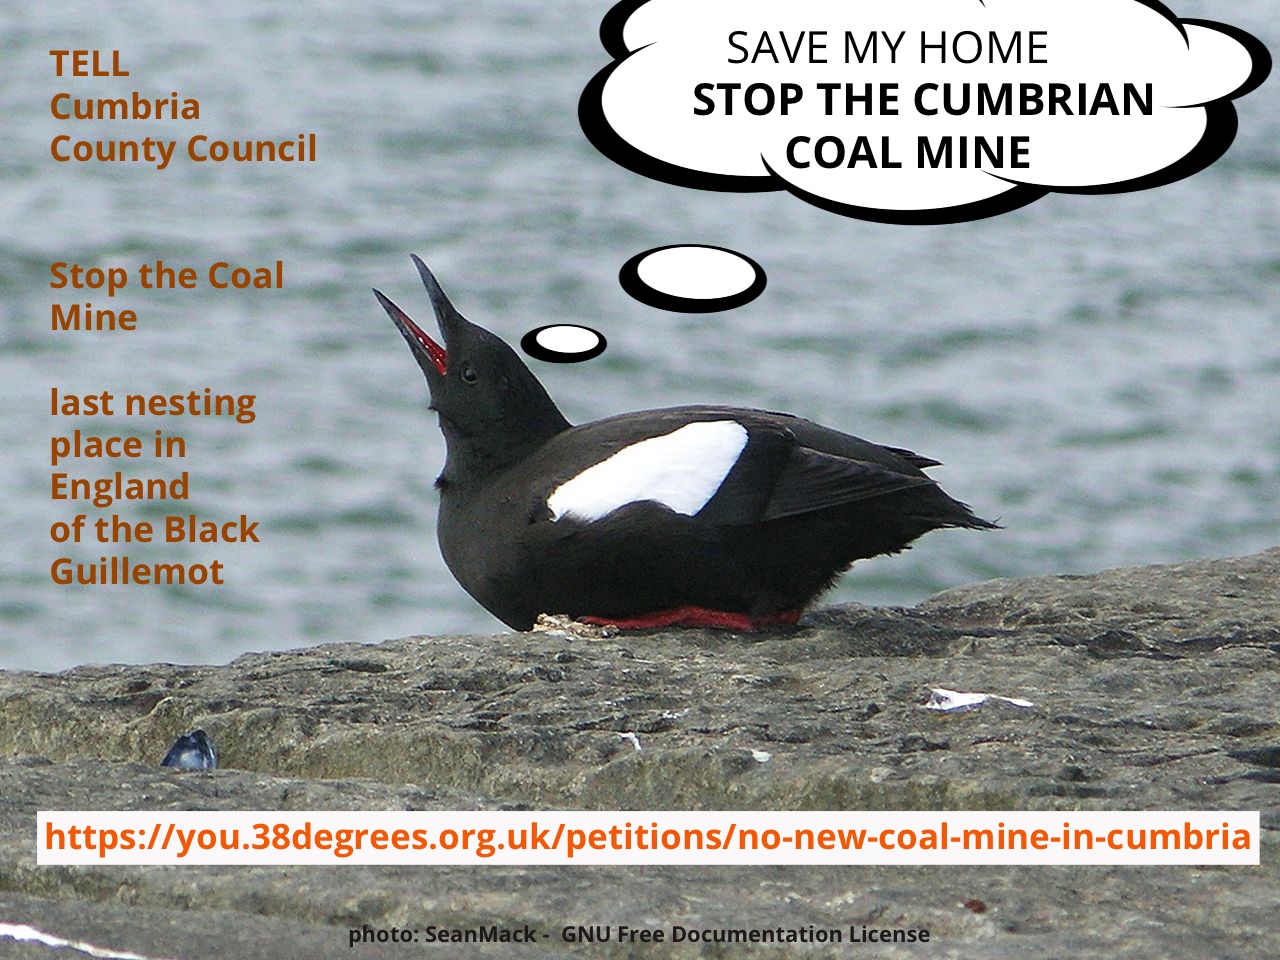 Save My Home Stop the Cumbrian Coal Mine